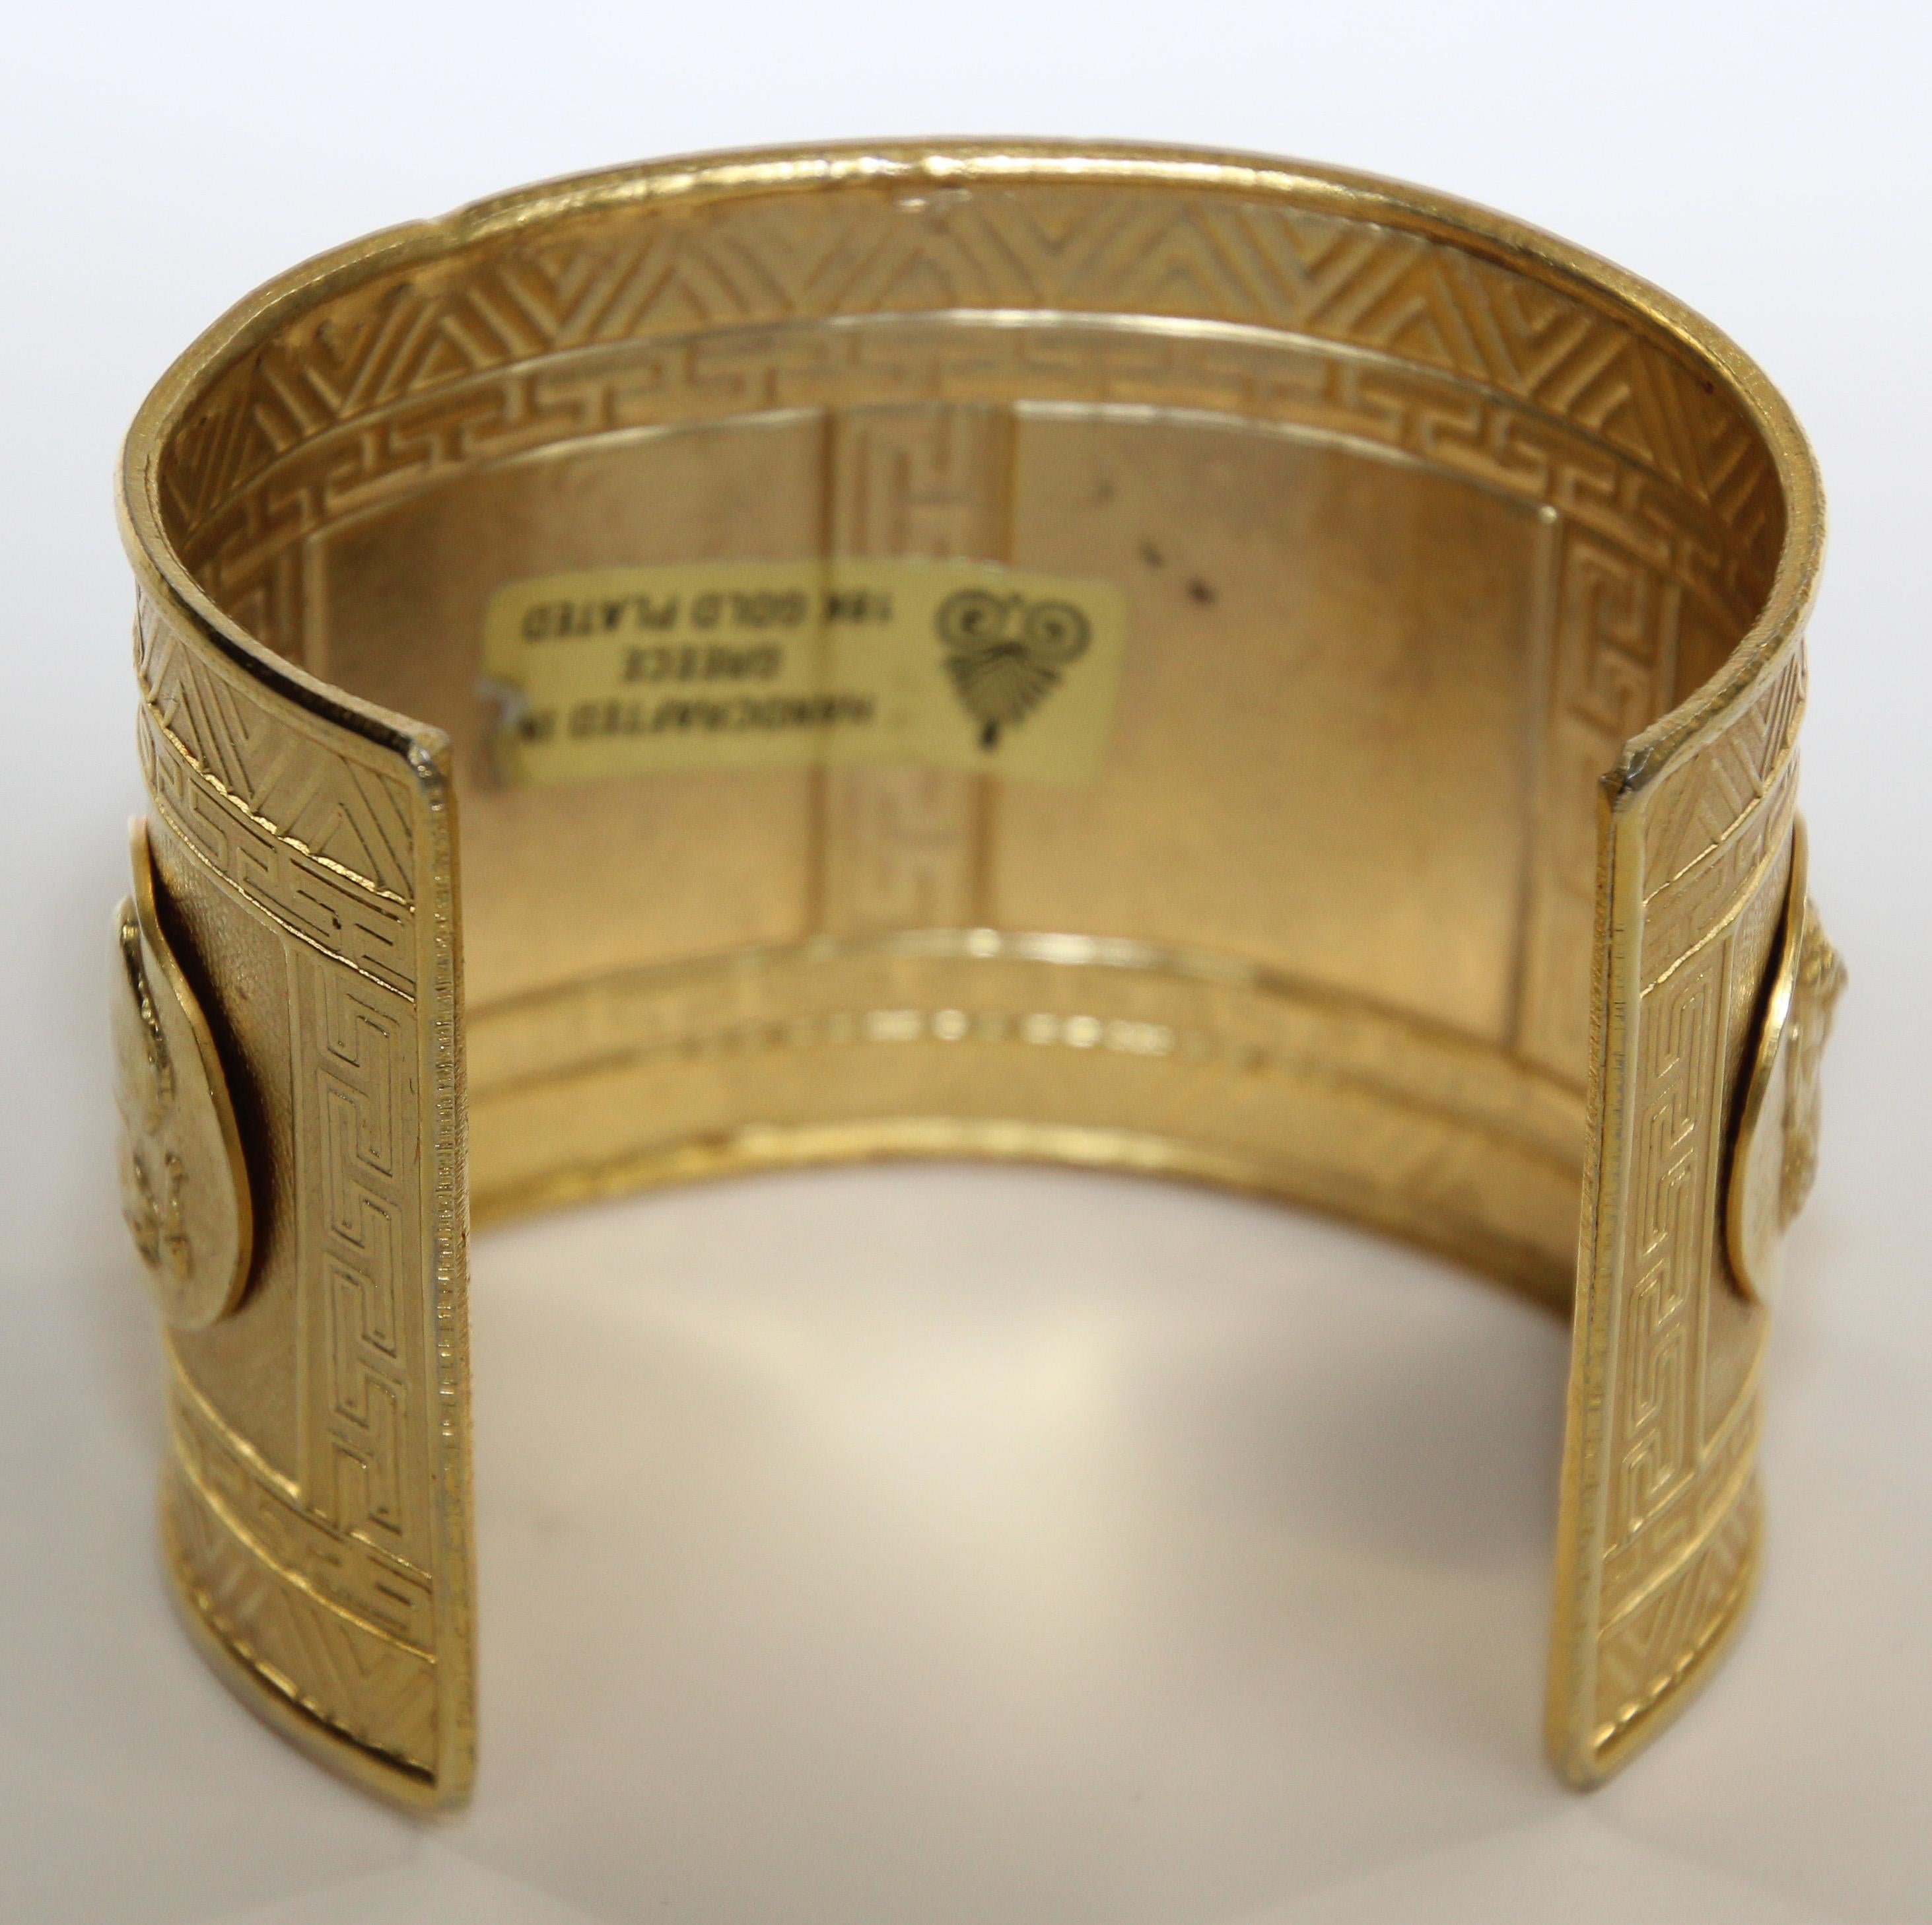 18 karat gold plate wide Greek cuff bracelet in the style of ancient Rome thick folded borders.
Women Men Cuff bracelet with figures of Caesars applied in medallions and geometric Greek designs.
Dress your wrist in this glowing statement maker.